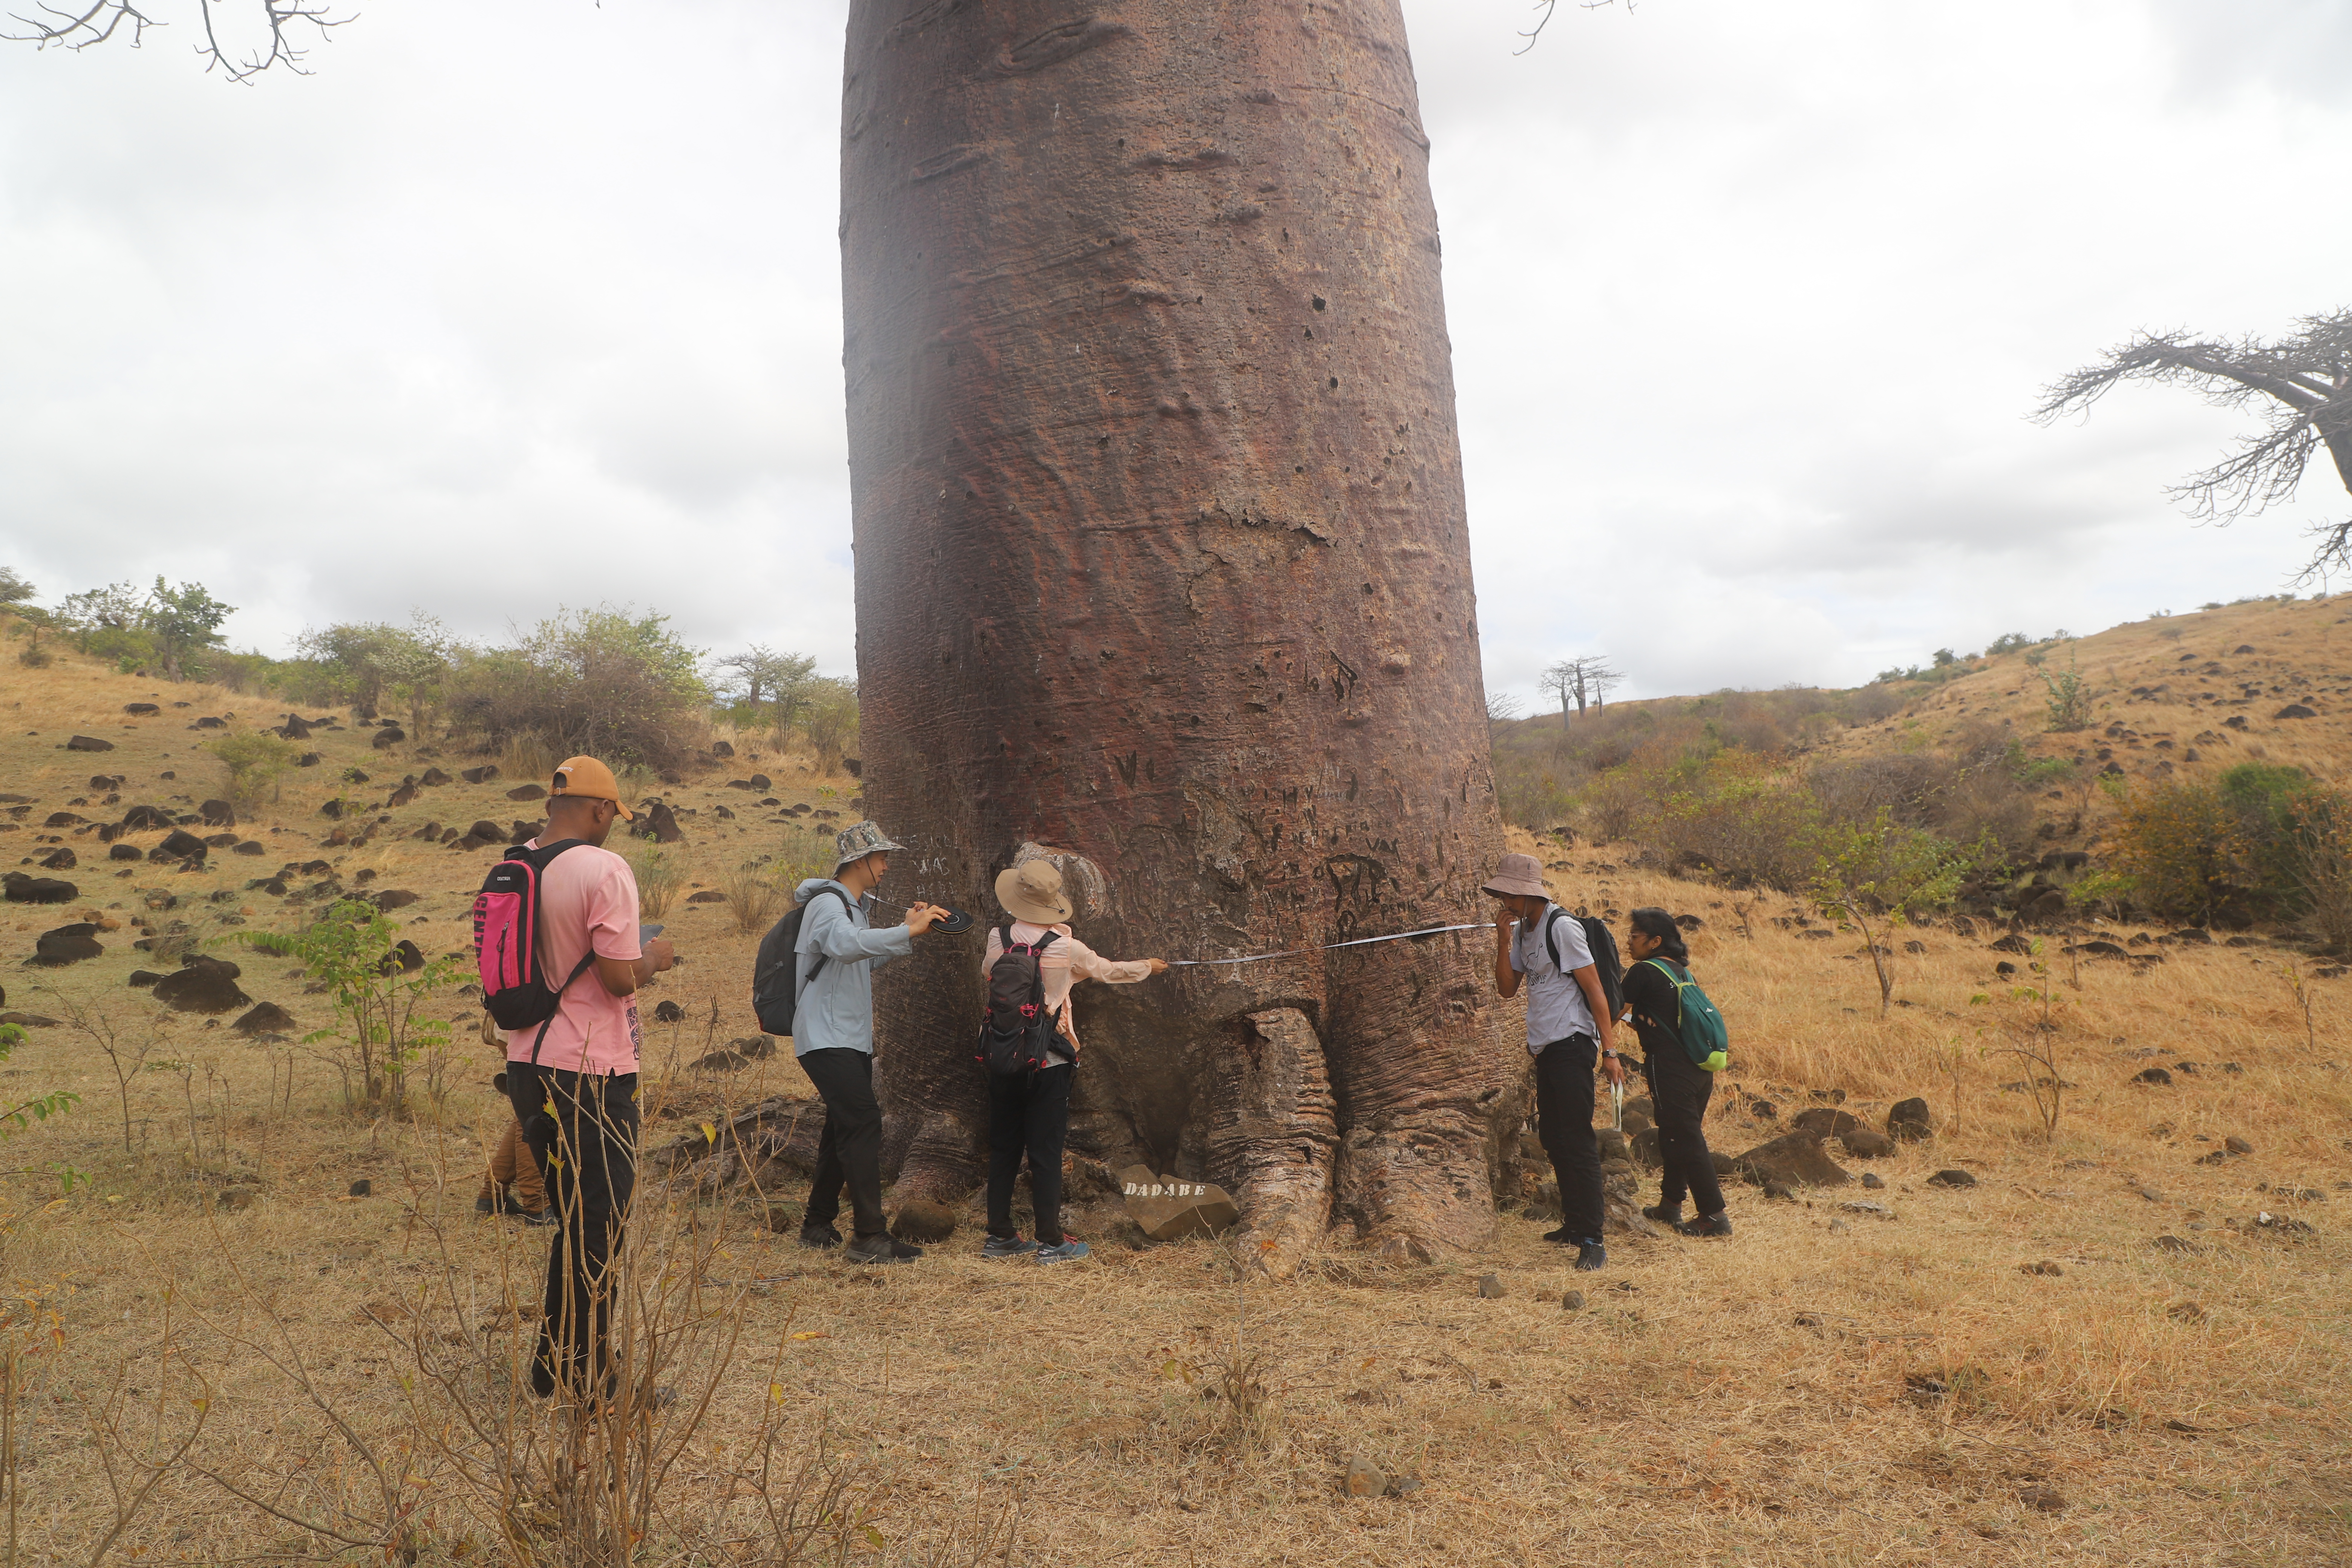 Researchers measure a baobab tree. /Provided by the WBG